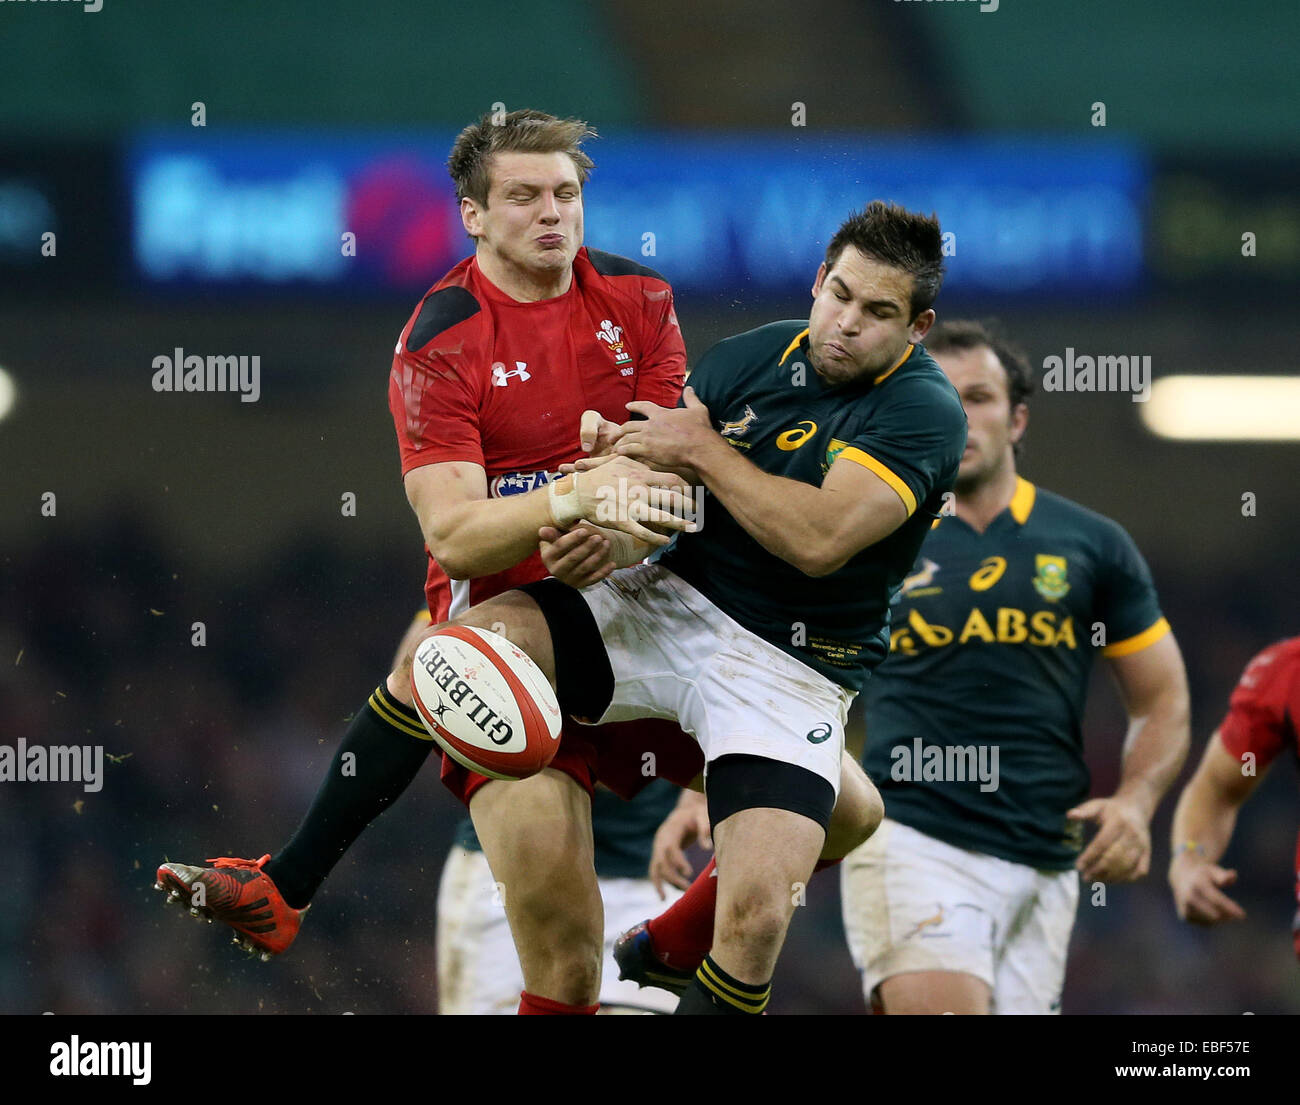 Cardiff, UK. 29th Nov, 2014. Dan Biggar of Wales goes to to toe with Cobus Reinach of South Africa for a high ball - Autumn Internationals - Wales vs South Africa - Millennium Stadium - Cardiff - Wales - 29th November 2014 - Picture Simon Bellis/Sportimage. Credit:  csm/Alamy Live News Stock Photo